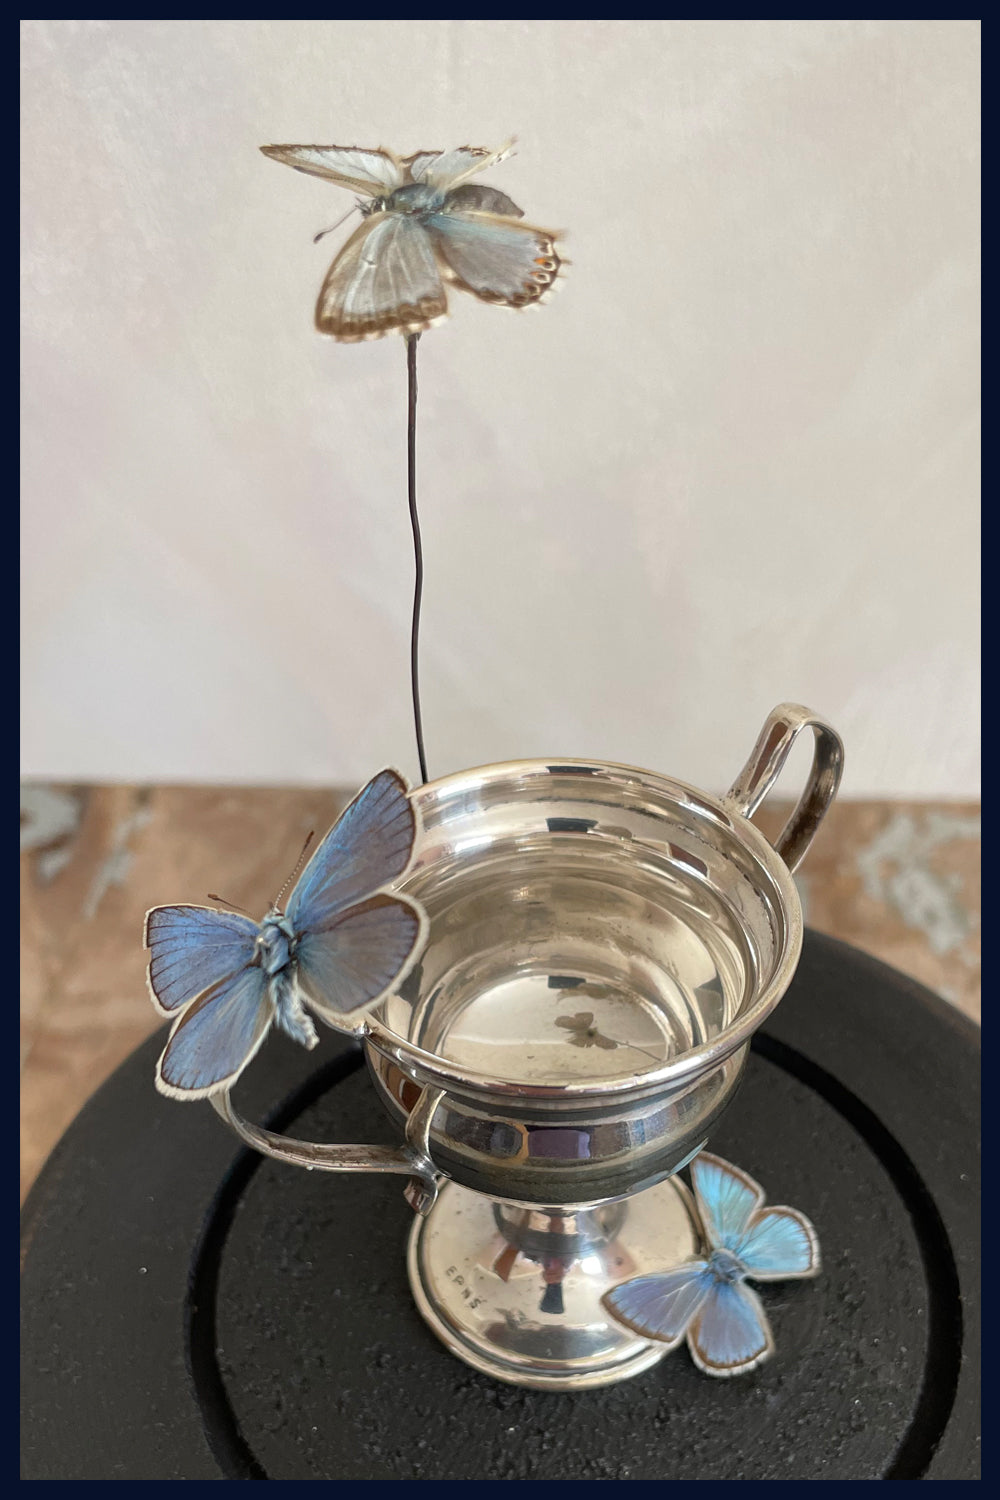 SOLD Enigma Variations Collection: A Vintage Silver-Plated Winners Cup with 3 Vintage Blue Butterflies in a Display Dome